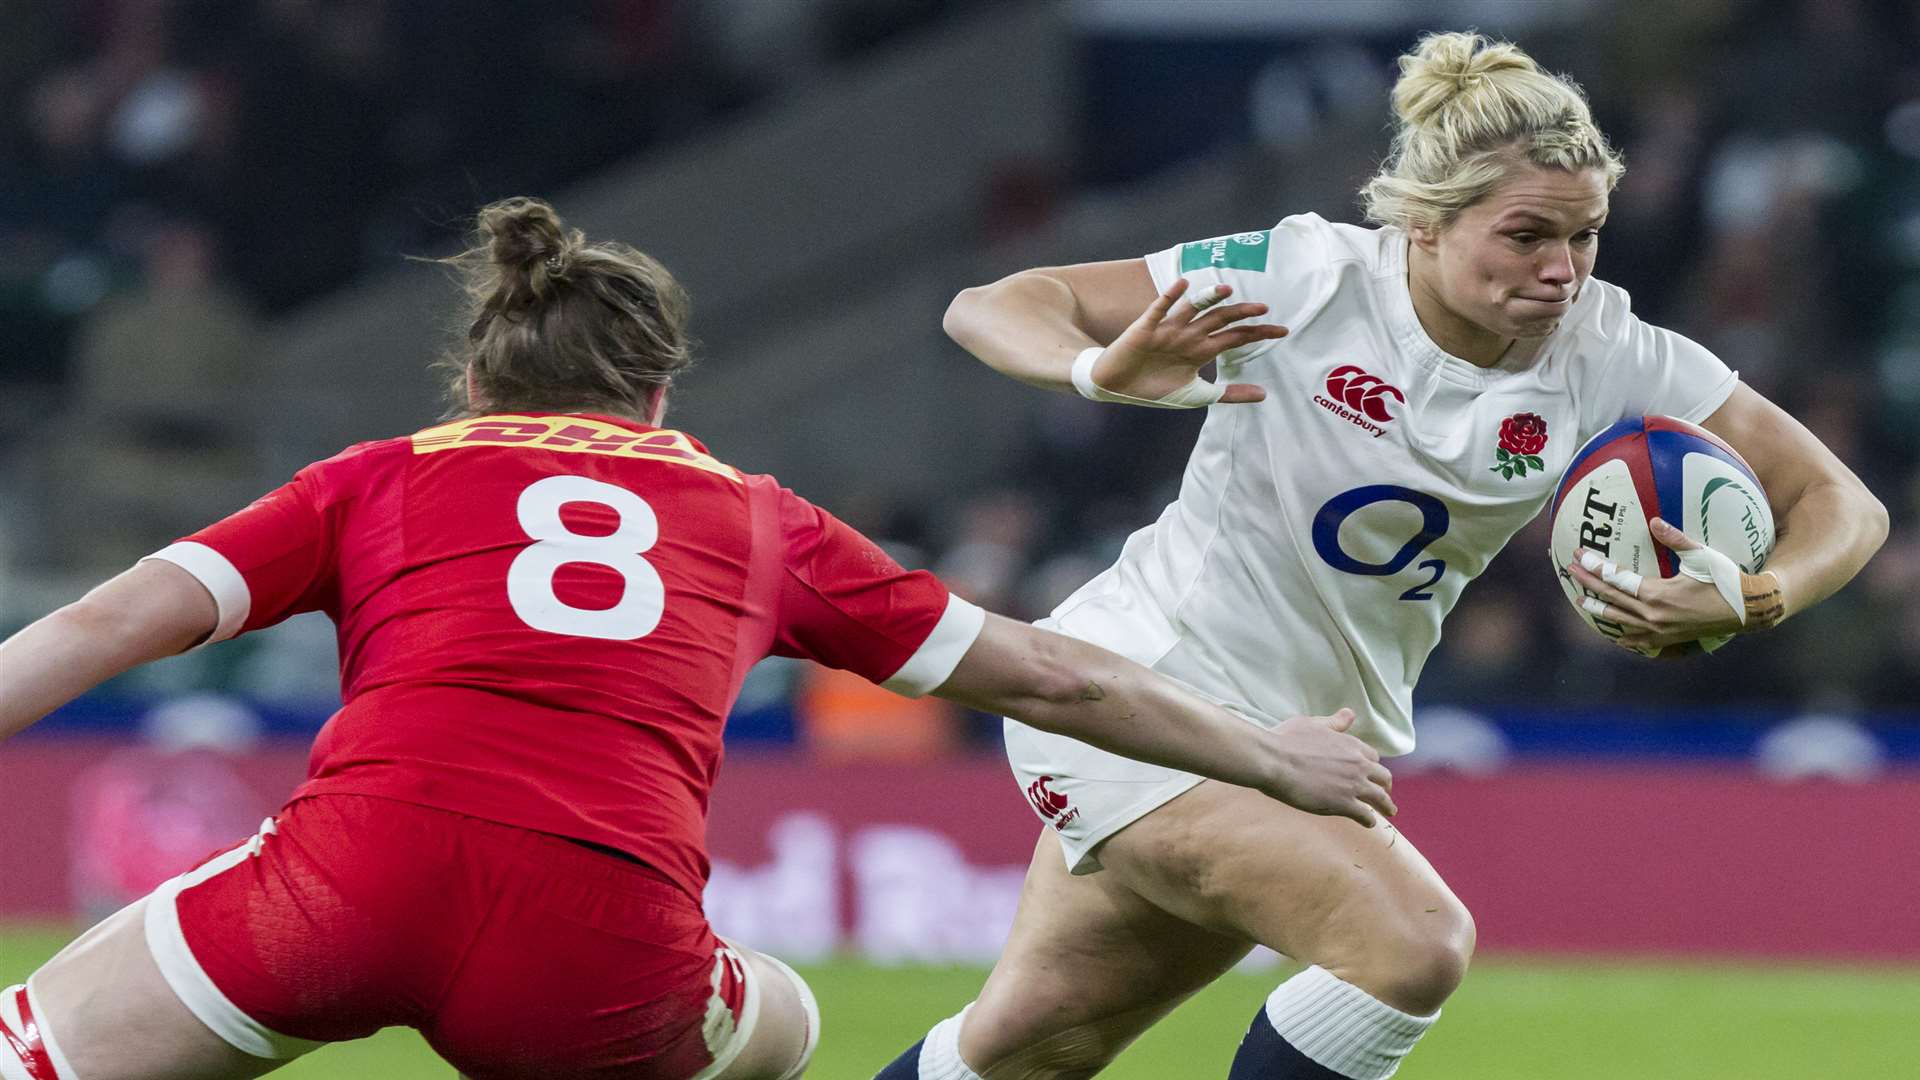 Rachael Burford in action for England against Canada at Twickenham last year Picture: Lissy Tomlinson/rugbymatters